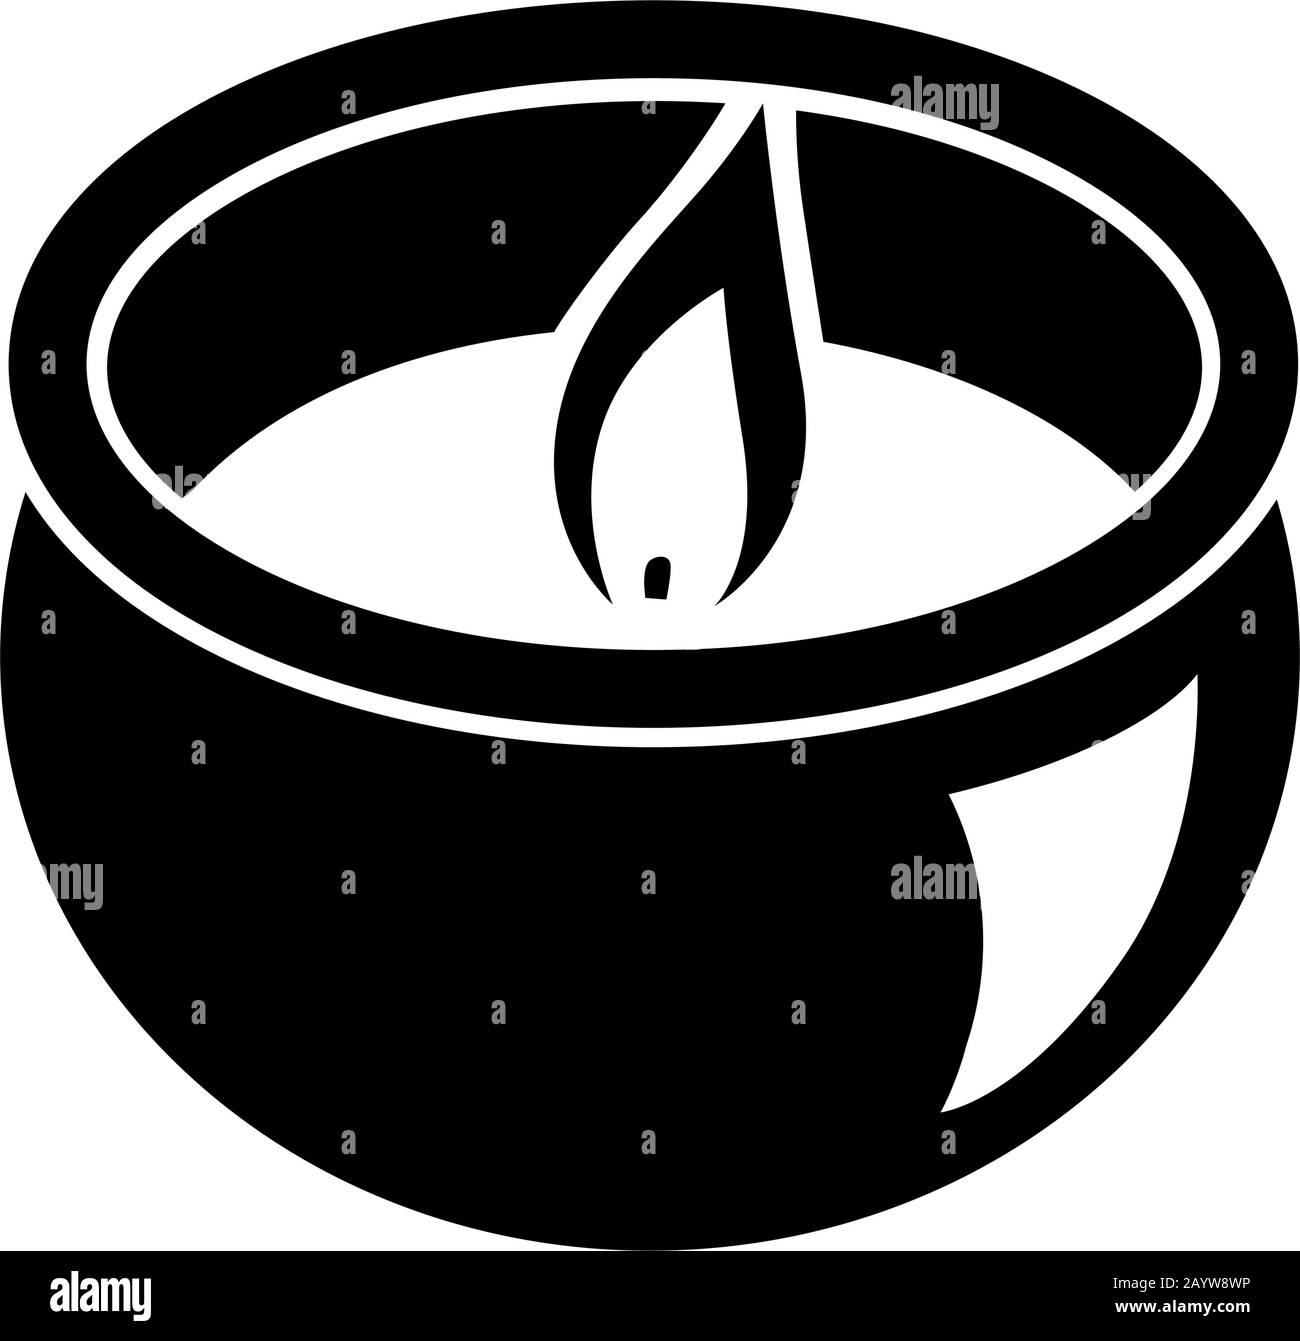 single candle, black vector graphic design element Stock Vector